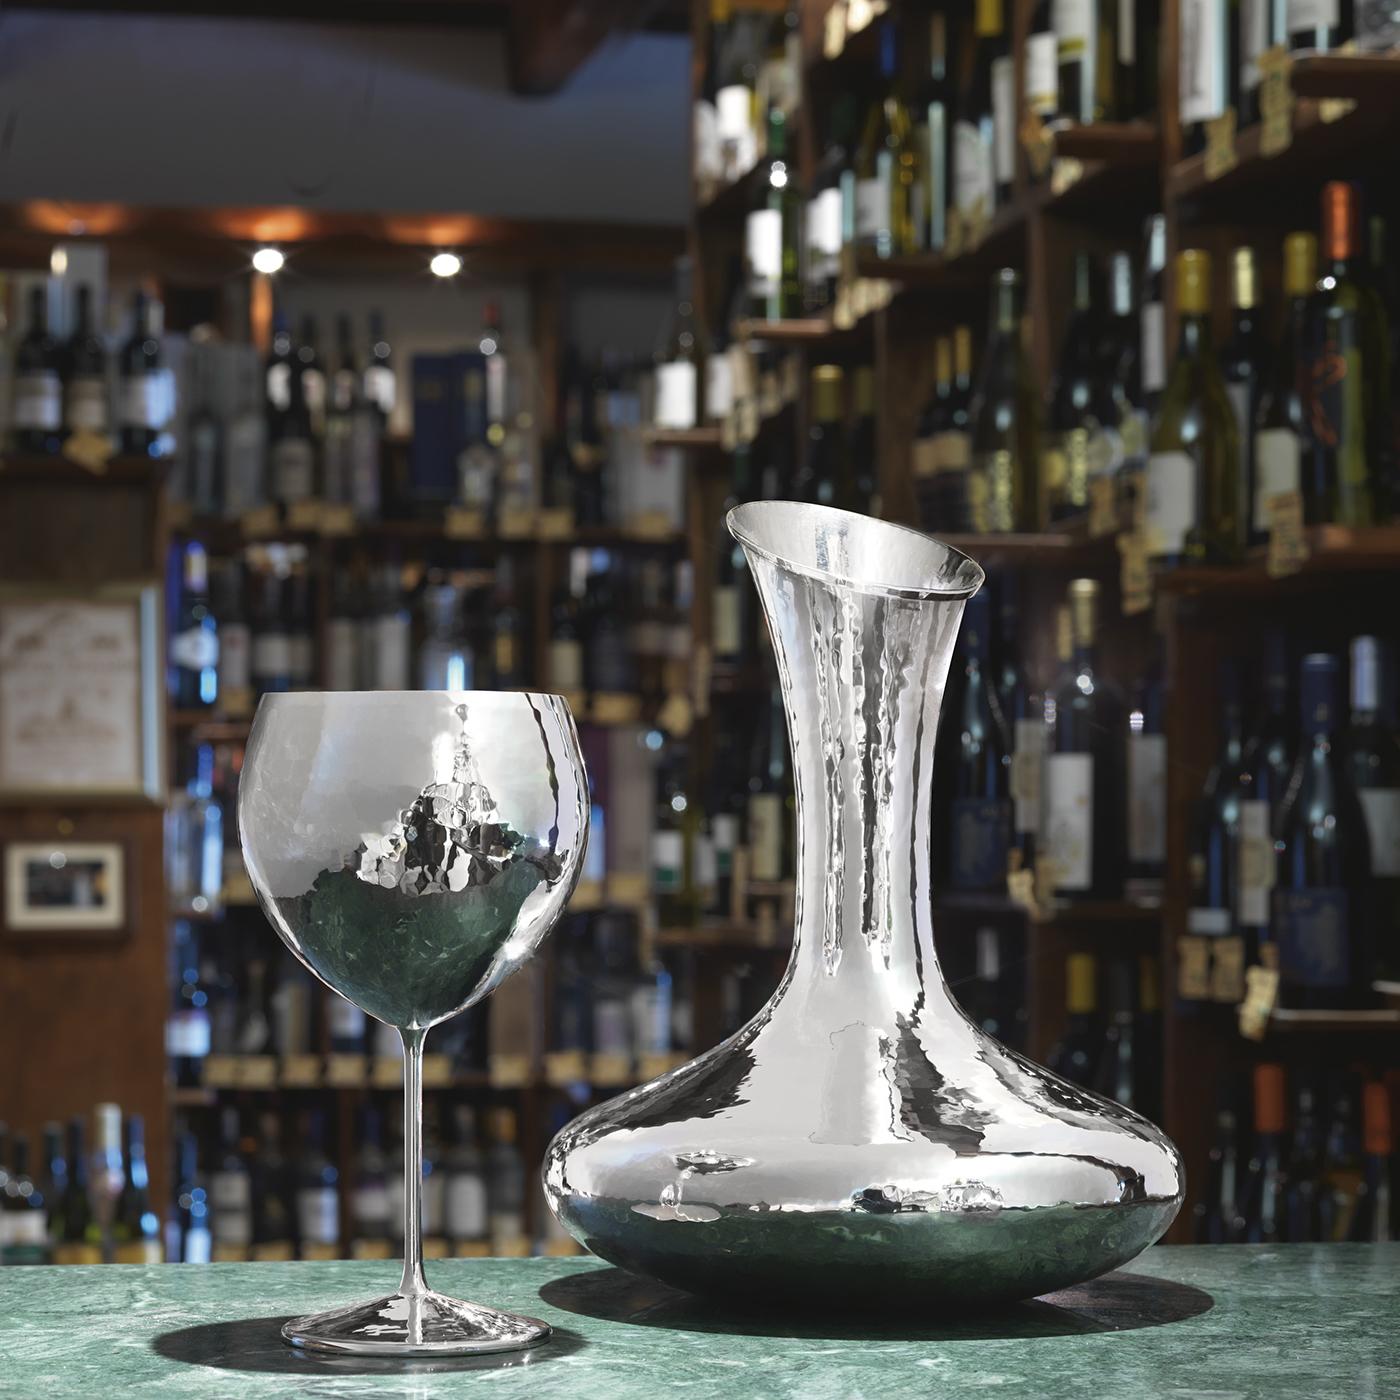 Silver is a phenomenal material for crafting drinking glasses as it offers antibacterial and antibiotic properties while maintaining the fine quality and taste of the beverage inside. Offering extraordinary dining elegance with a simple design, this